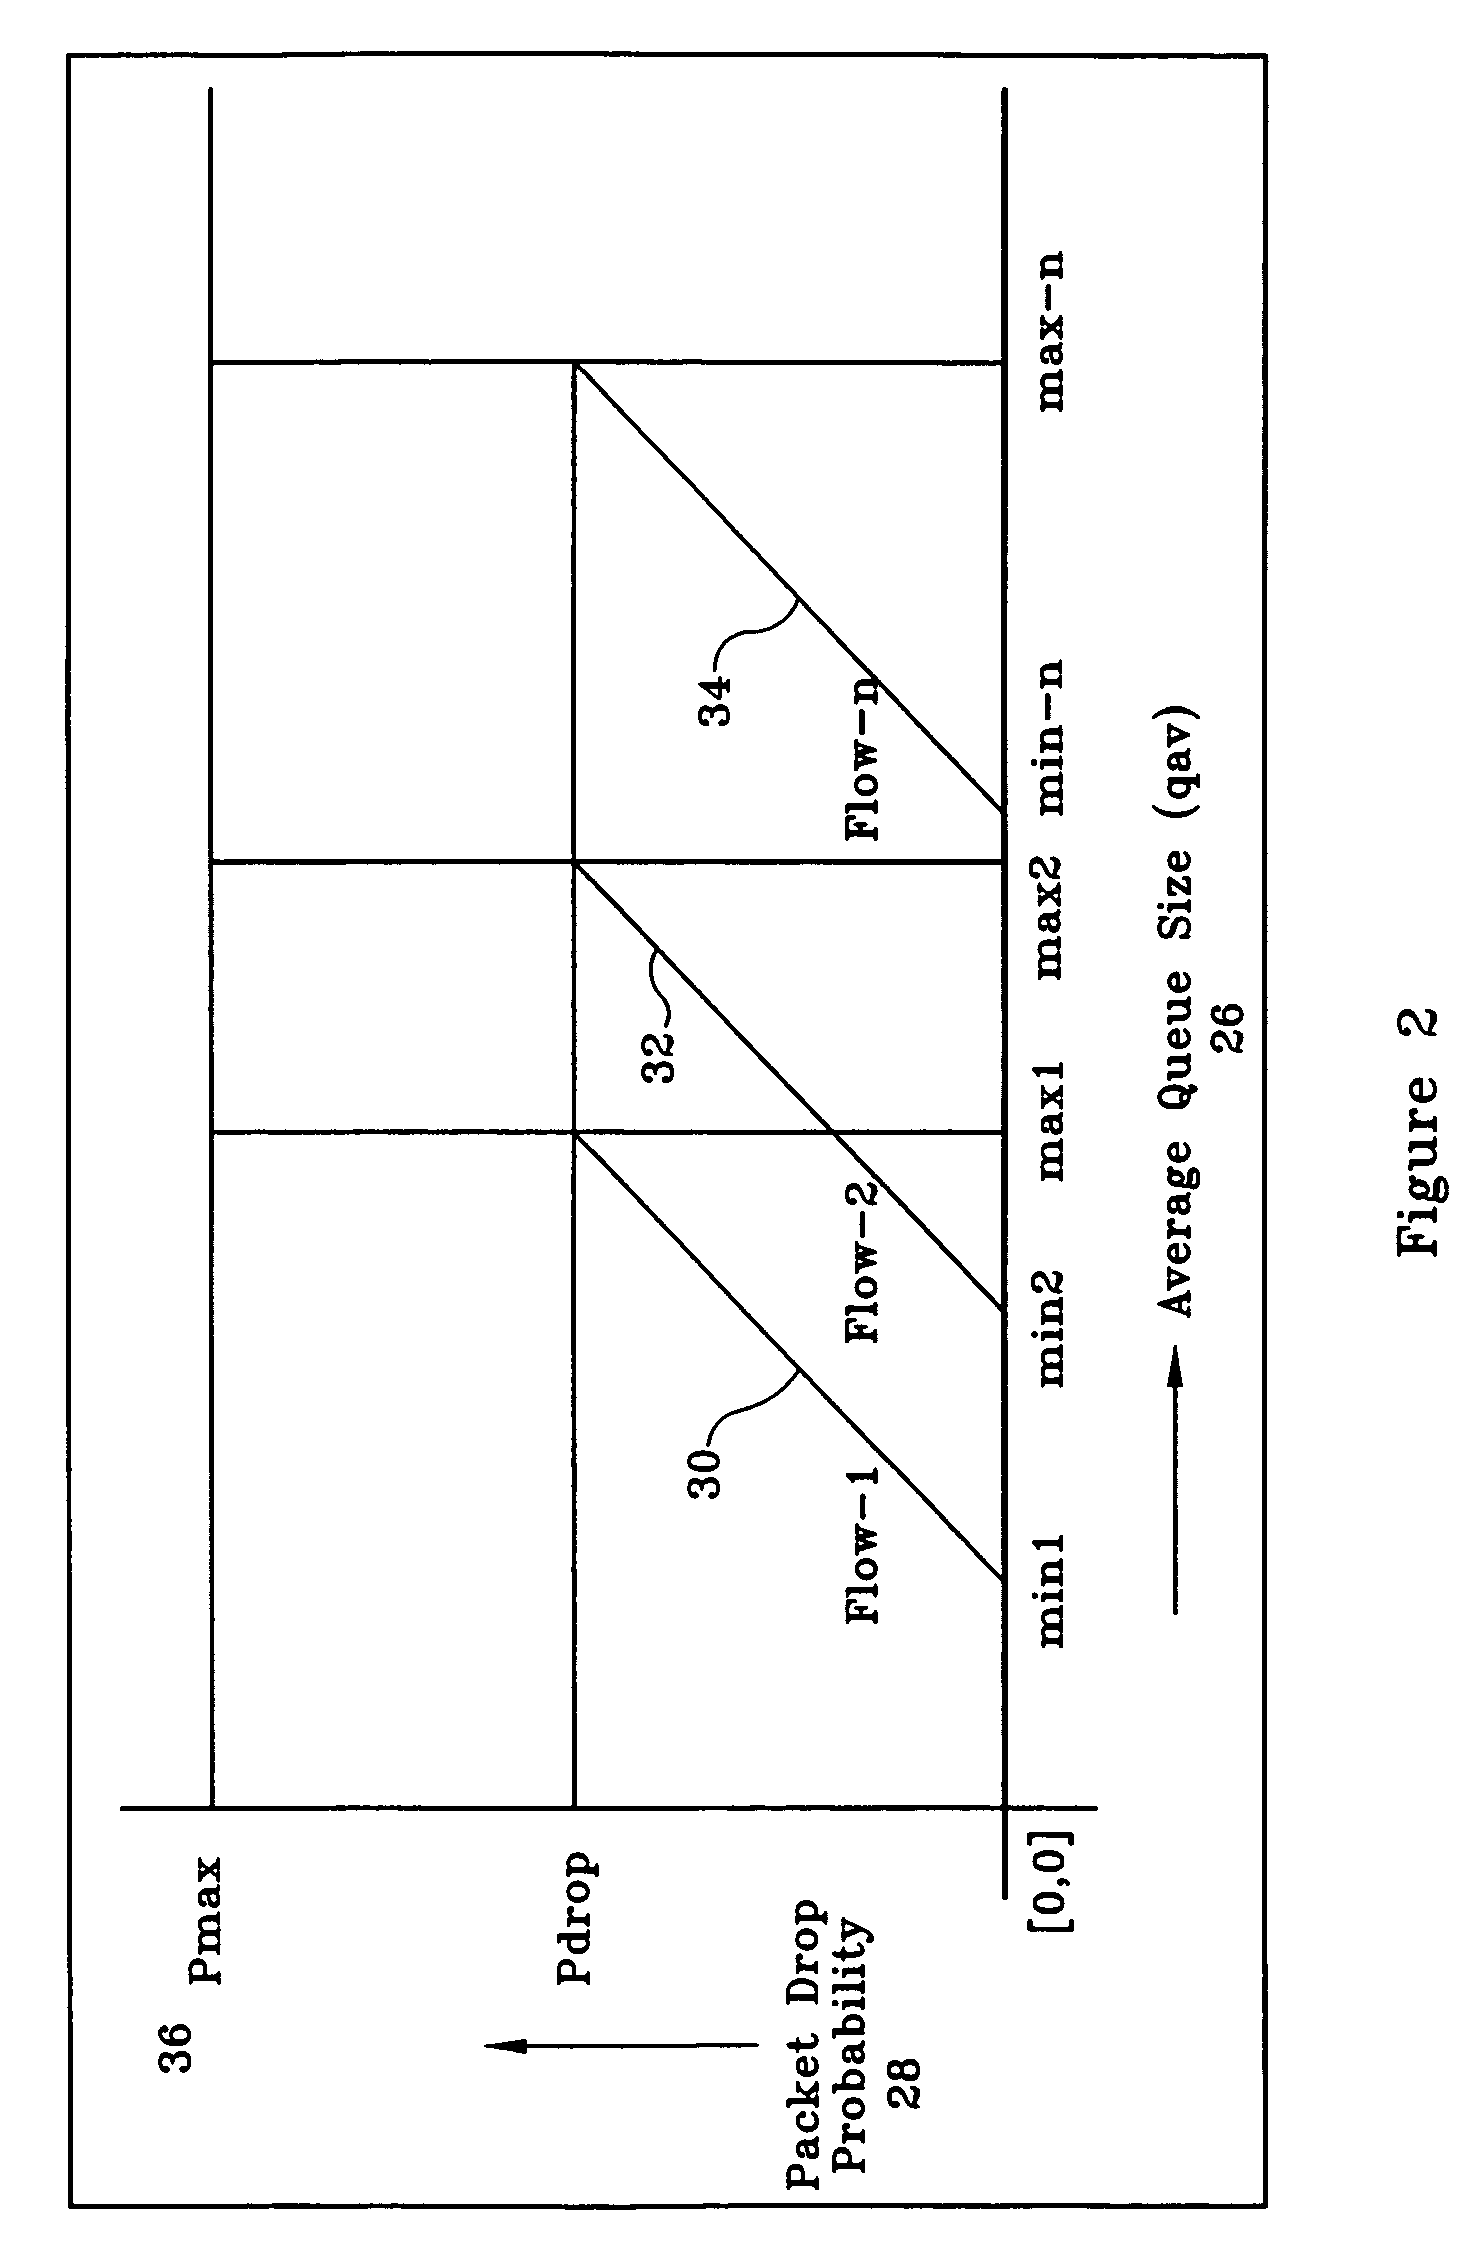 Single cycle weighted random early detection circuit and method